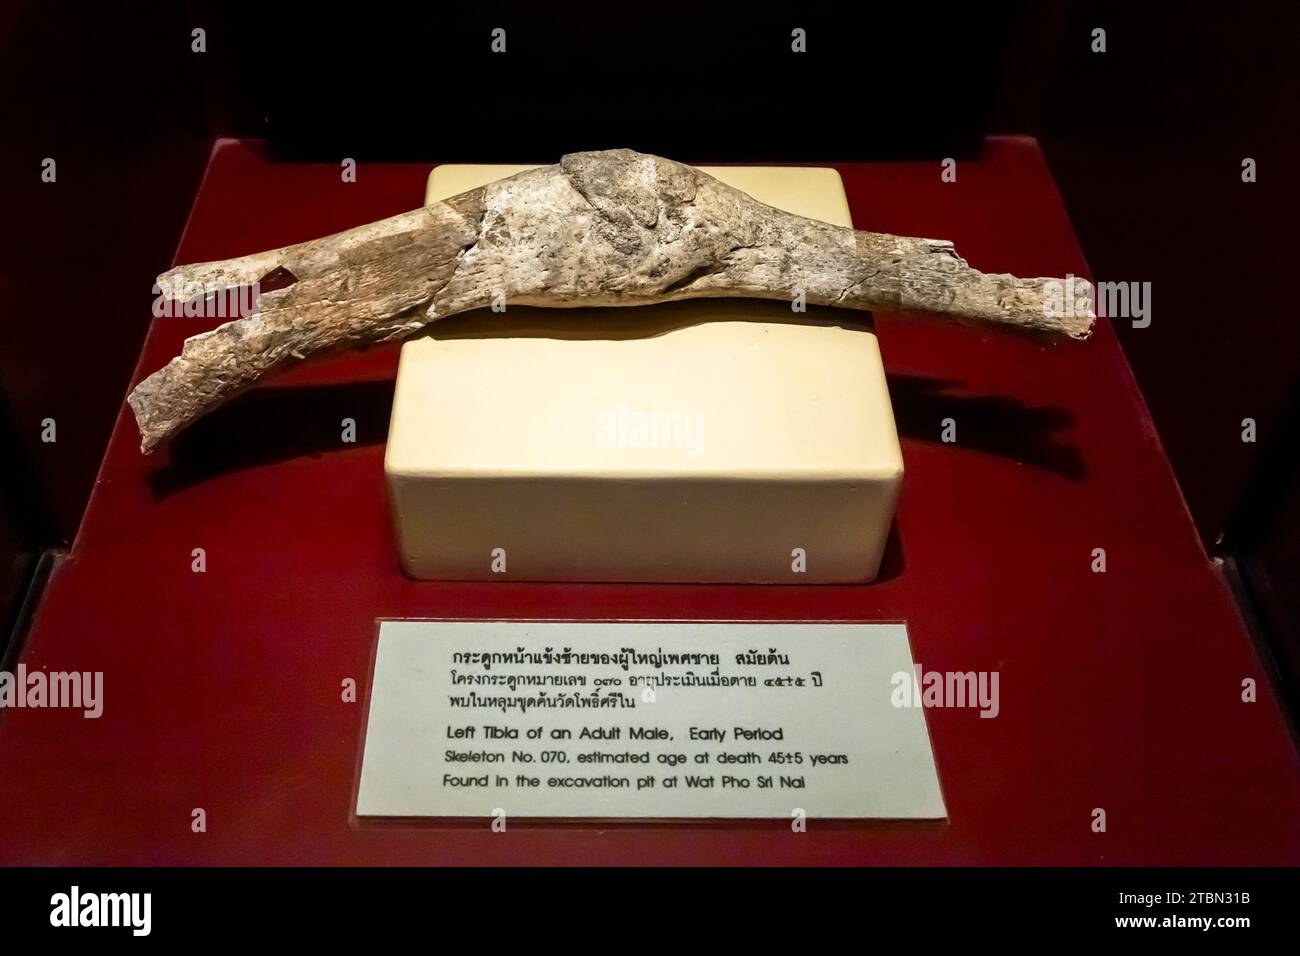 Ban Chiang national museum, left tibia of adult male, Healing traces, Ban Chiang, Udon Thani, Thailand, Southeast Asia, Asia Stock Photo